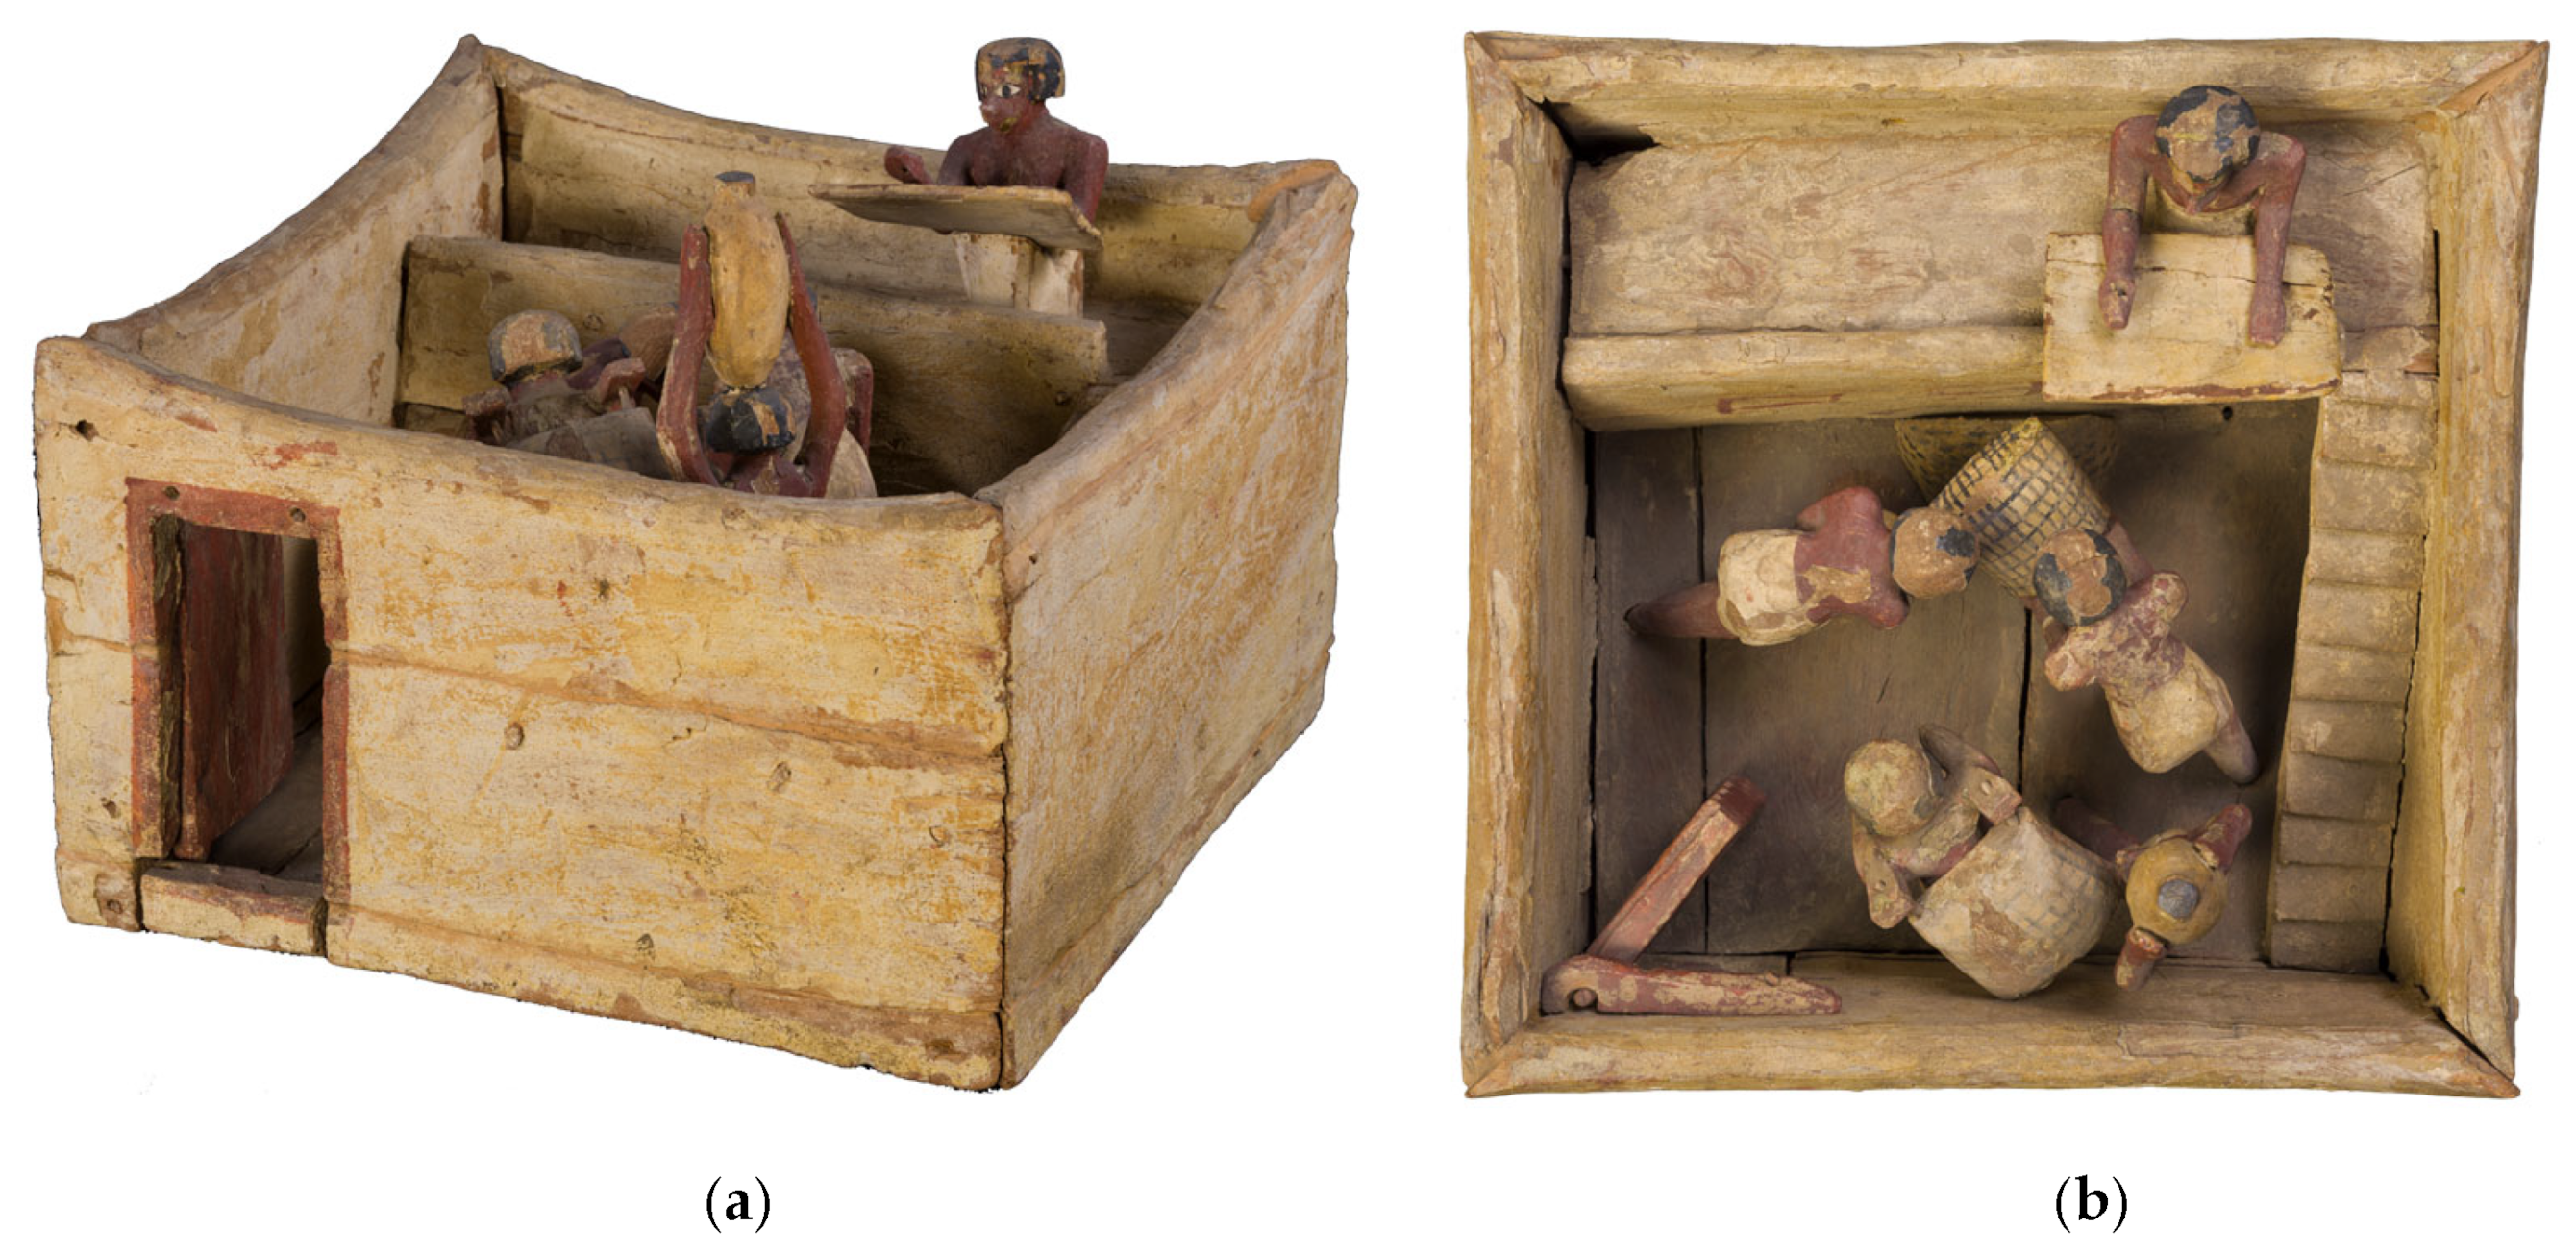 Heritage | Free Full-Text | 3D Multispectral Imaging for Cultural Heritage  Preservation: The Case Study of a Wooden Sculpture of the Museo Egizio di  Torino